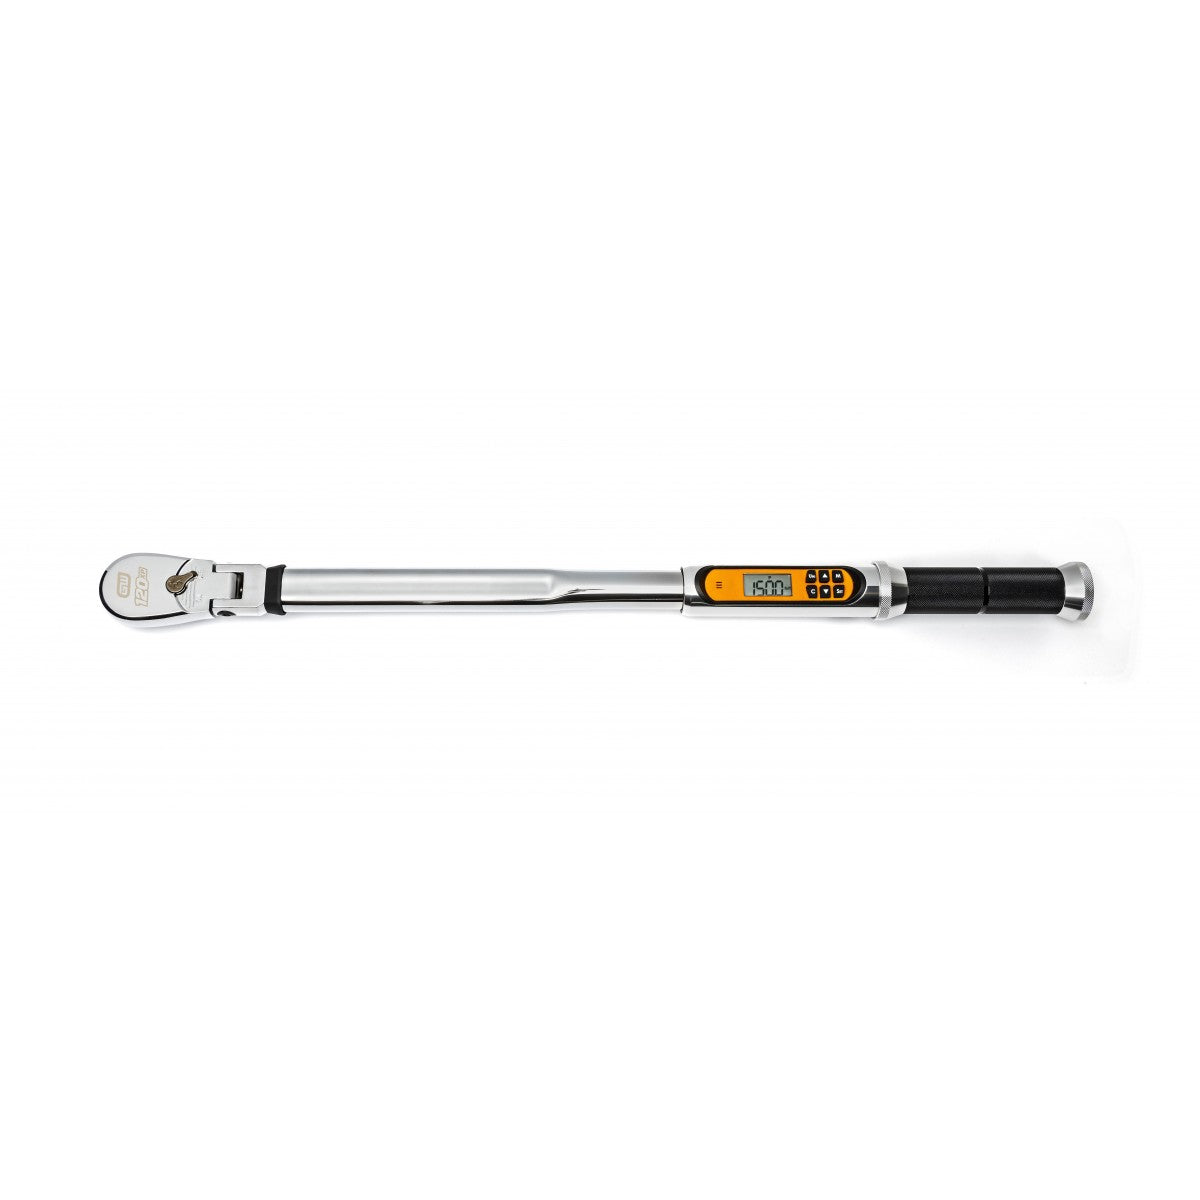 1/2" 120XP Flex Head Electronic Torque Wrench With Angle 85196 by Gearwrench